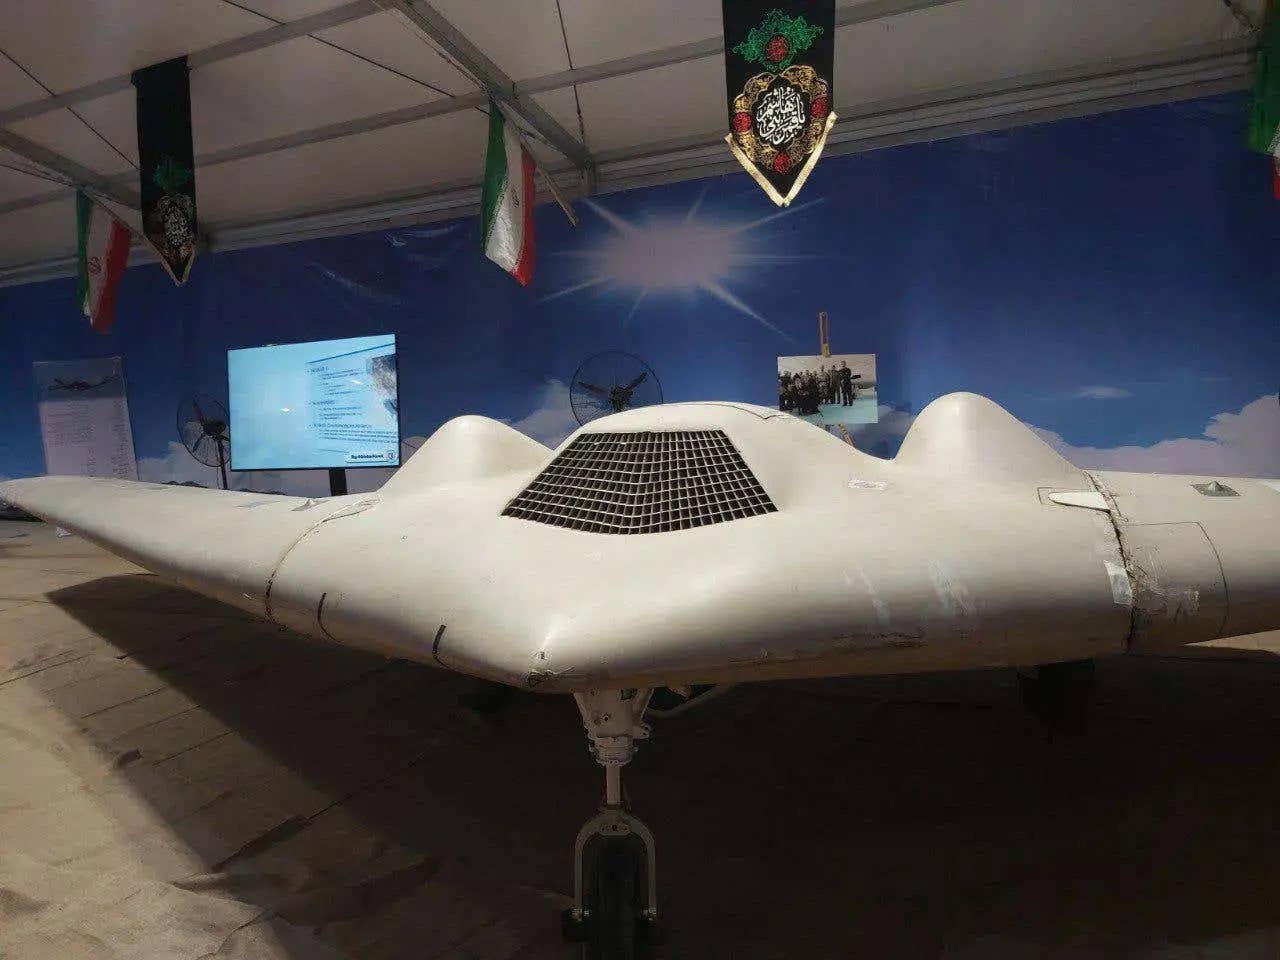 The RQ-170 that crashed in Iran in 2011 now on display in that country.<em> Iranian state media</em>